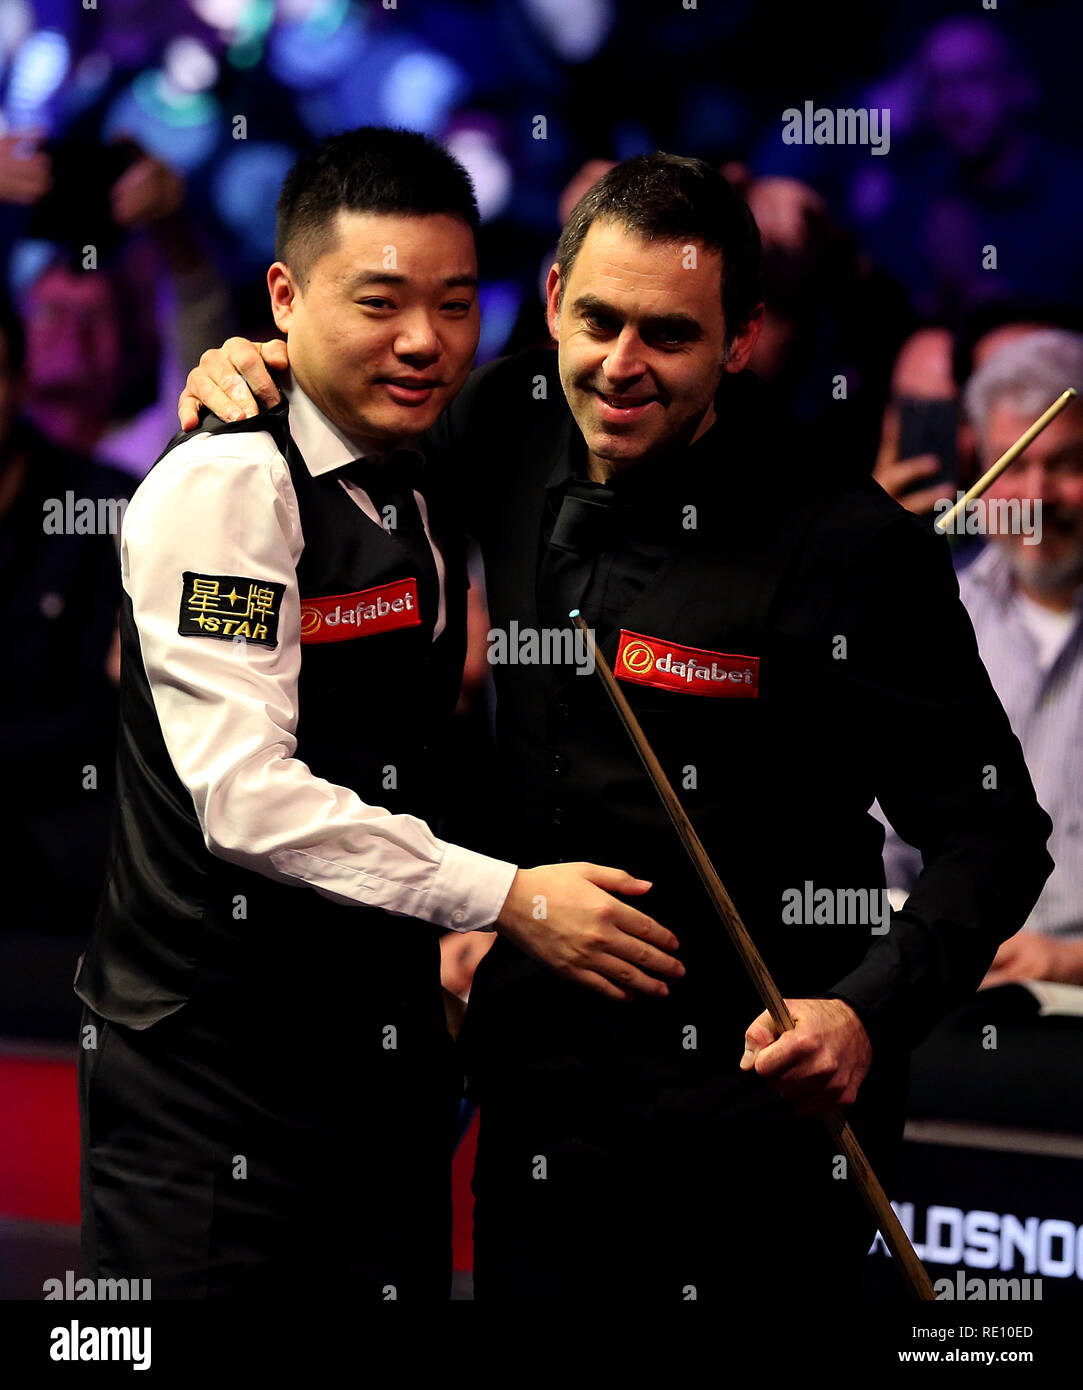 Ronnie OSullivan console Ding Junhui after winning the match during day seven of the 2019 Dafabet Masters at Alexandra Palace, London Stock Photo